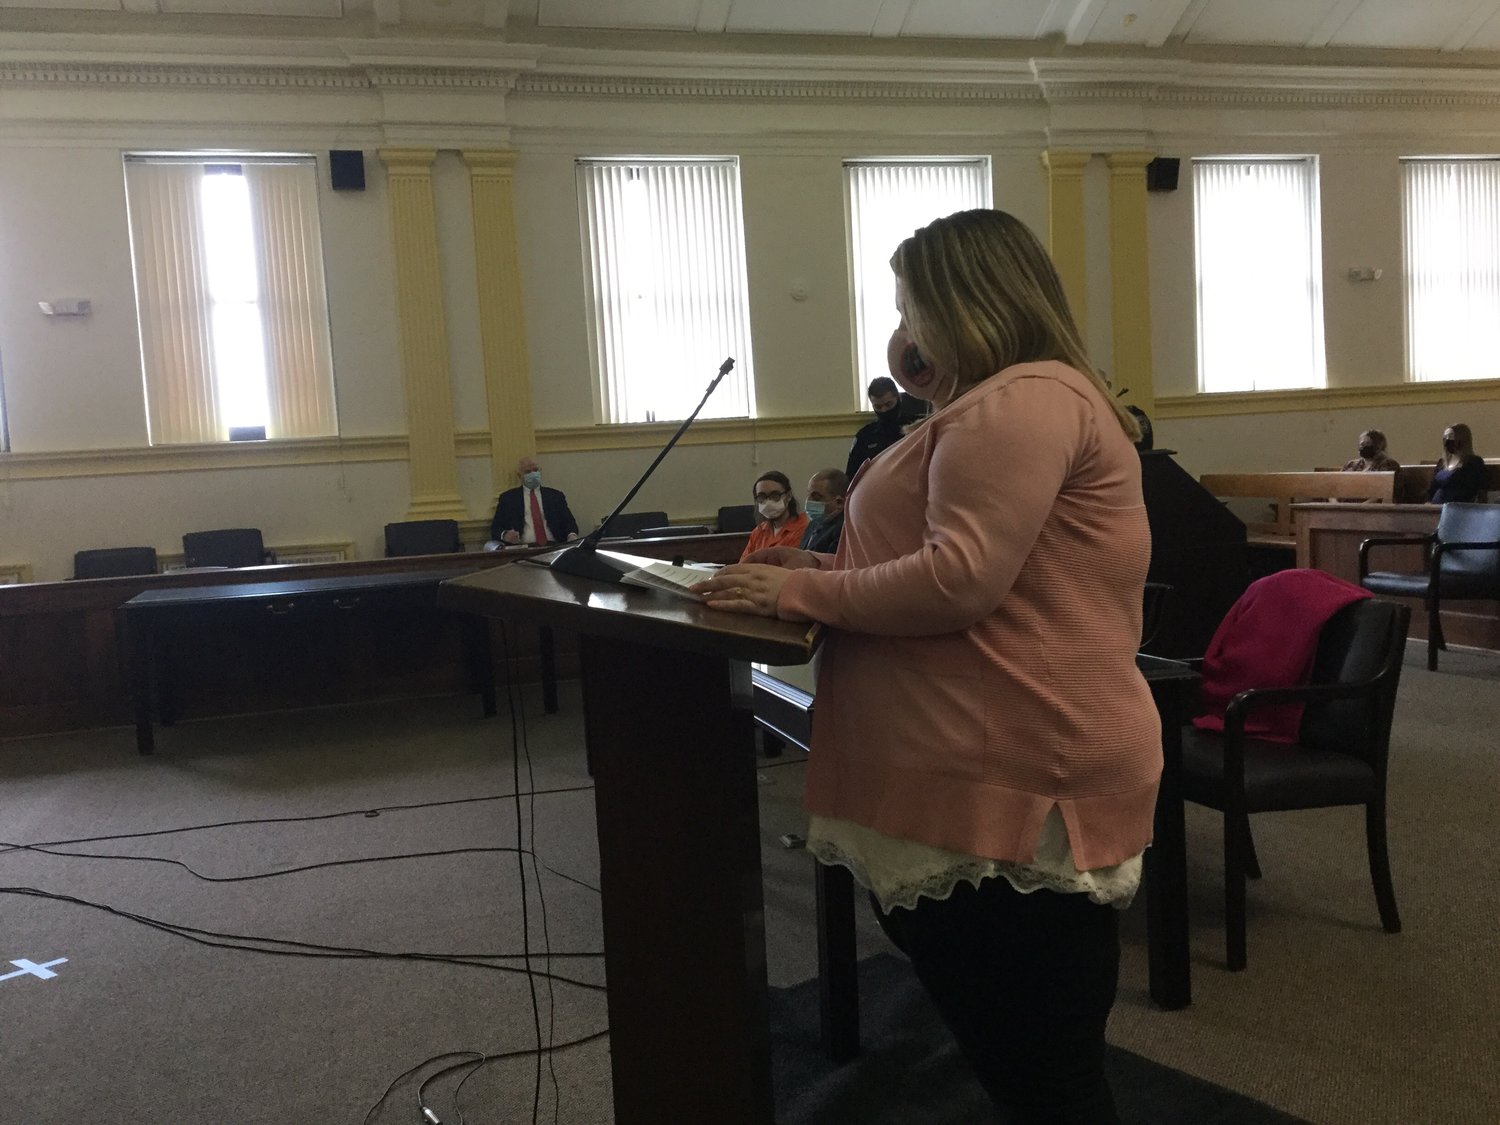 A MOTHER REMEMBERS — Kim Devins, mother to Bianca, also spoke in court Tuesday morning. She recalled happy car rides with Bianca, and spoke of her daughter’s desire to help others. Devins said she is living a “nightmare” as the death and the photos still haunt her.